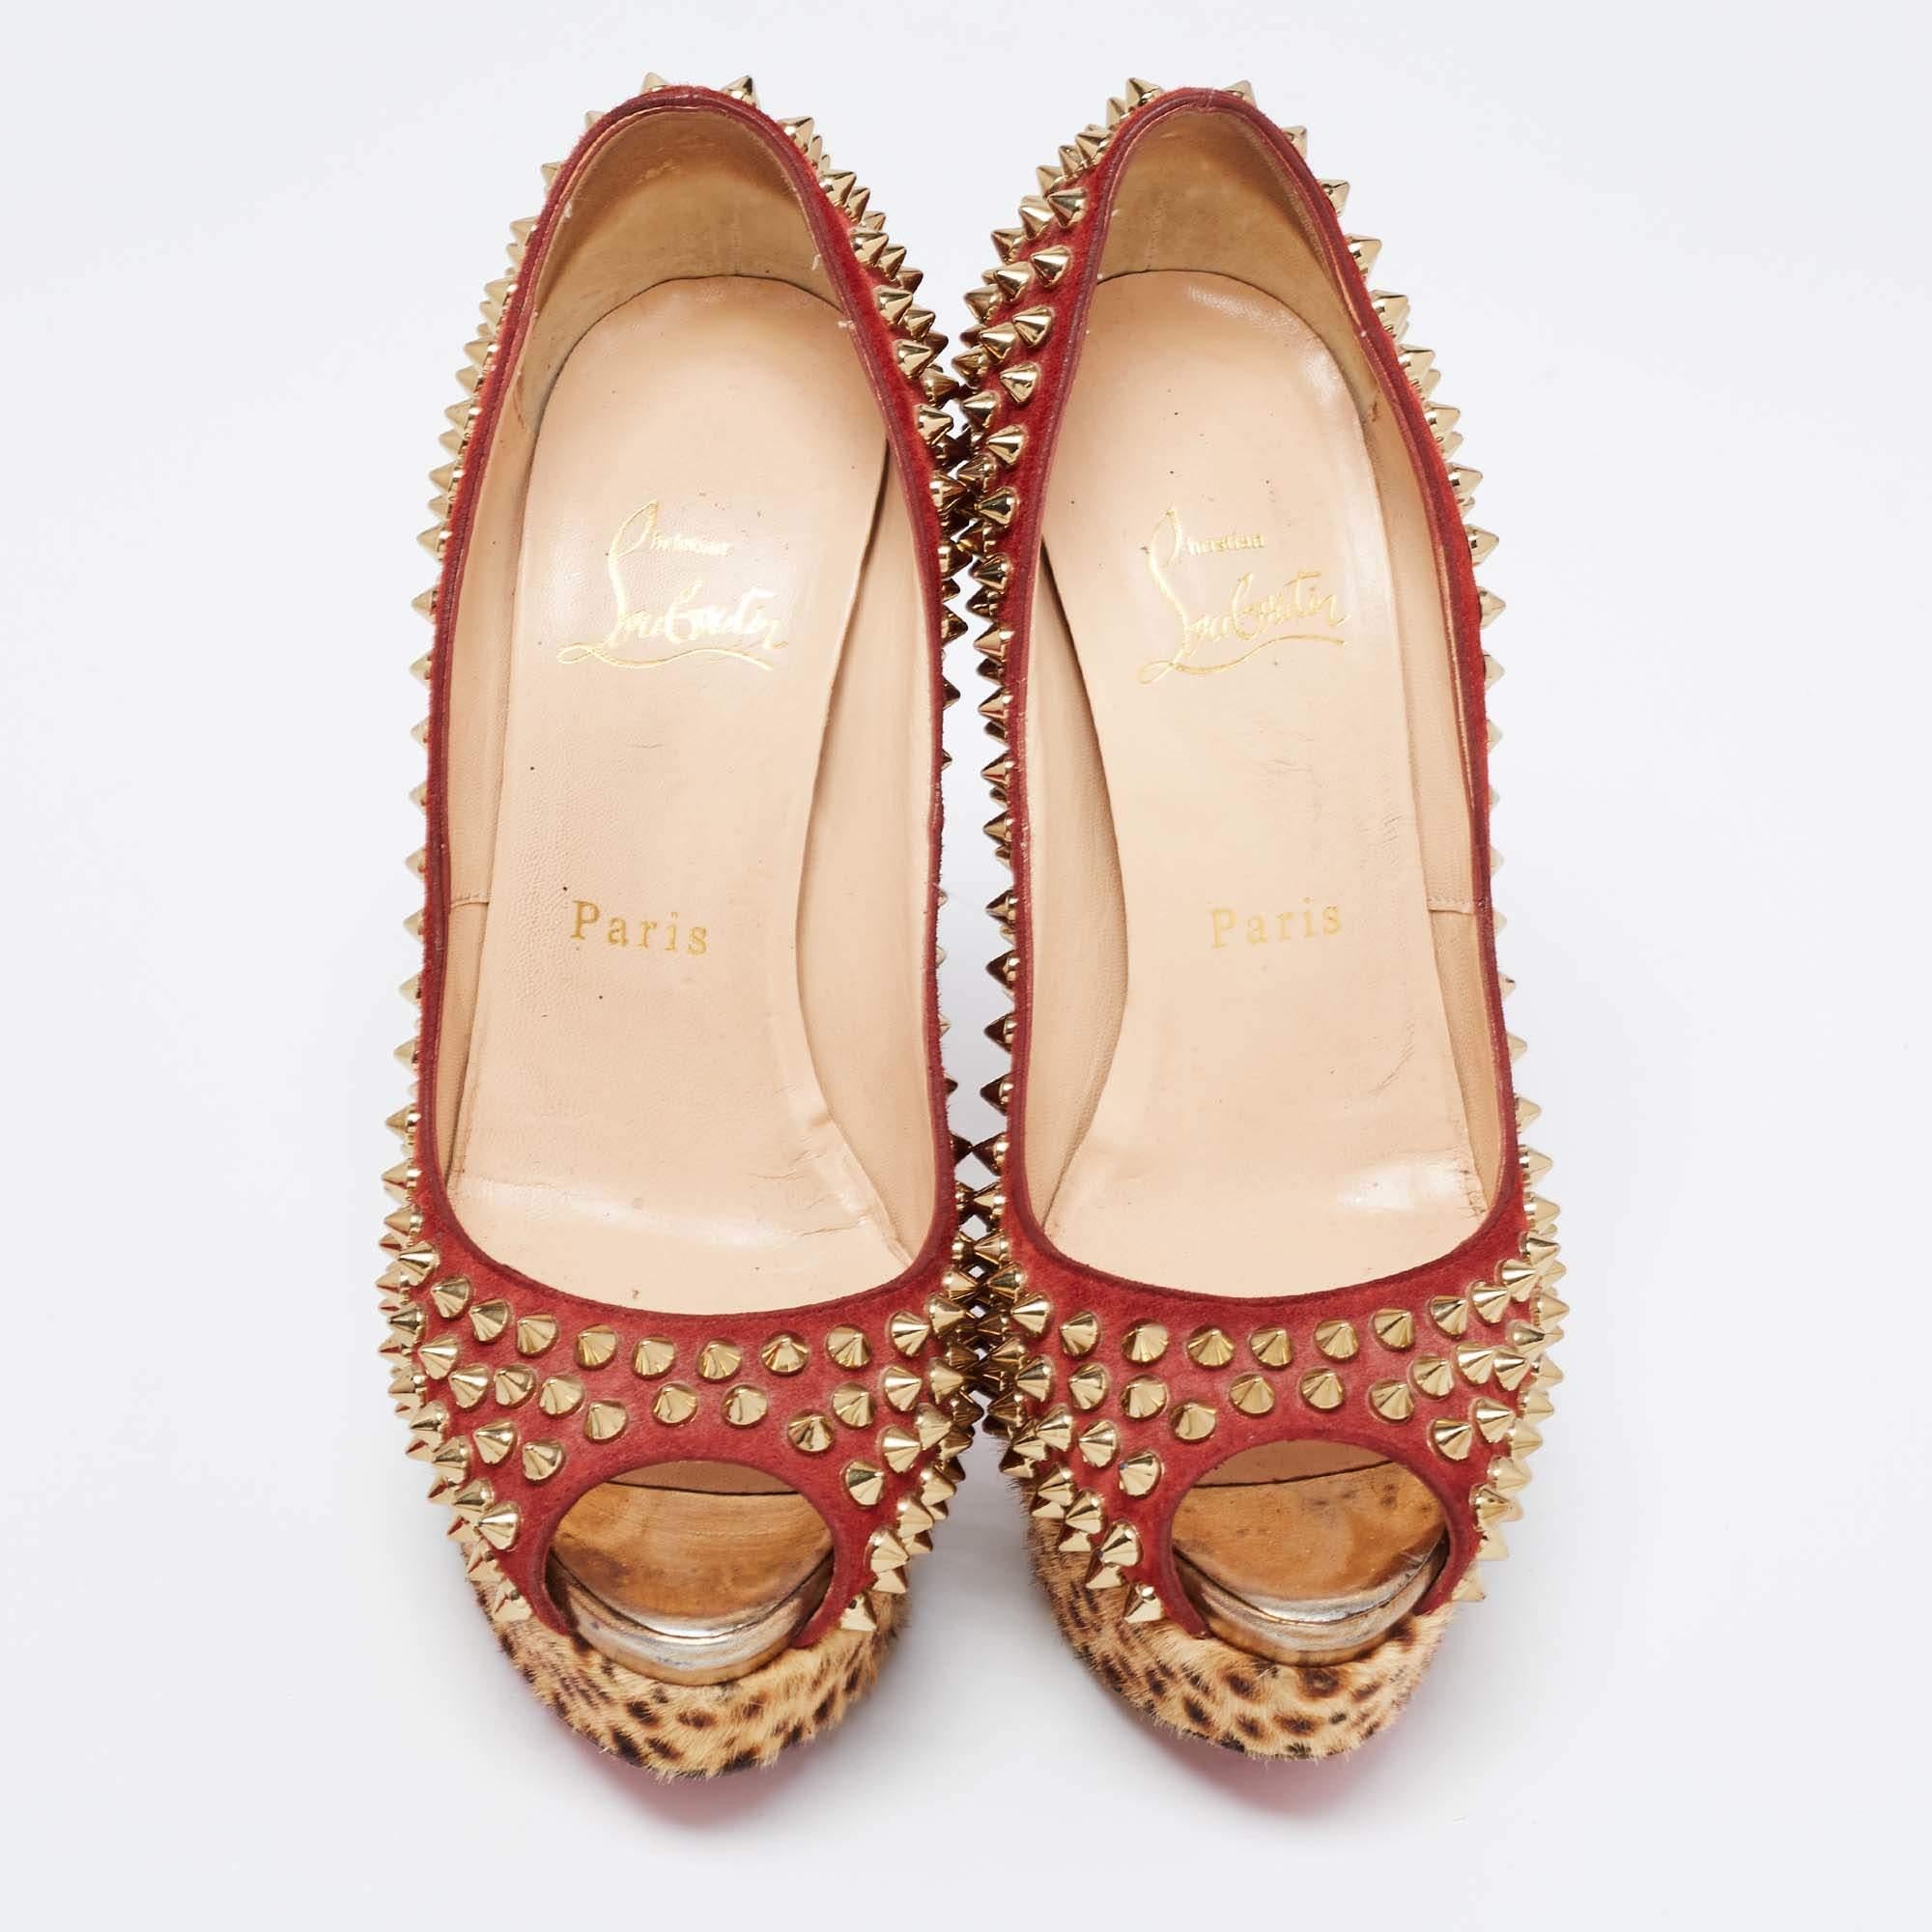 Add a statement finish with these Louboutins. Crafted from suede and leather, these Lady Peep spikes pumps carry eye-catching decorations, peep toes, and 12 cm heels with platforms covered in leopard-print calf hair. Complete with the signature red